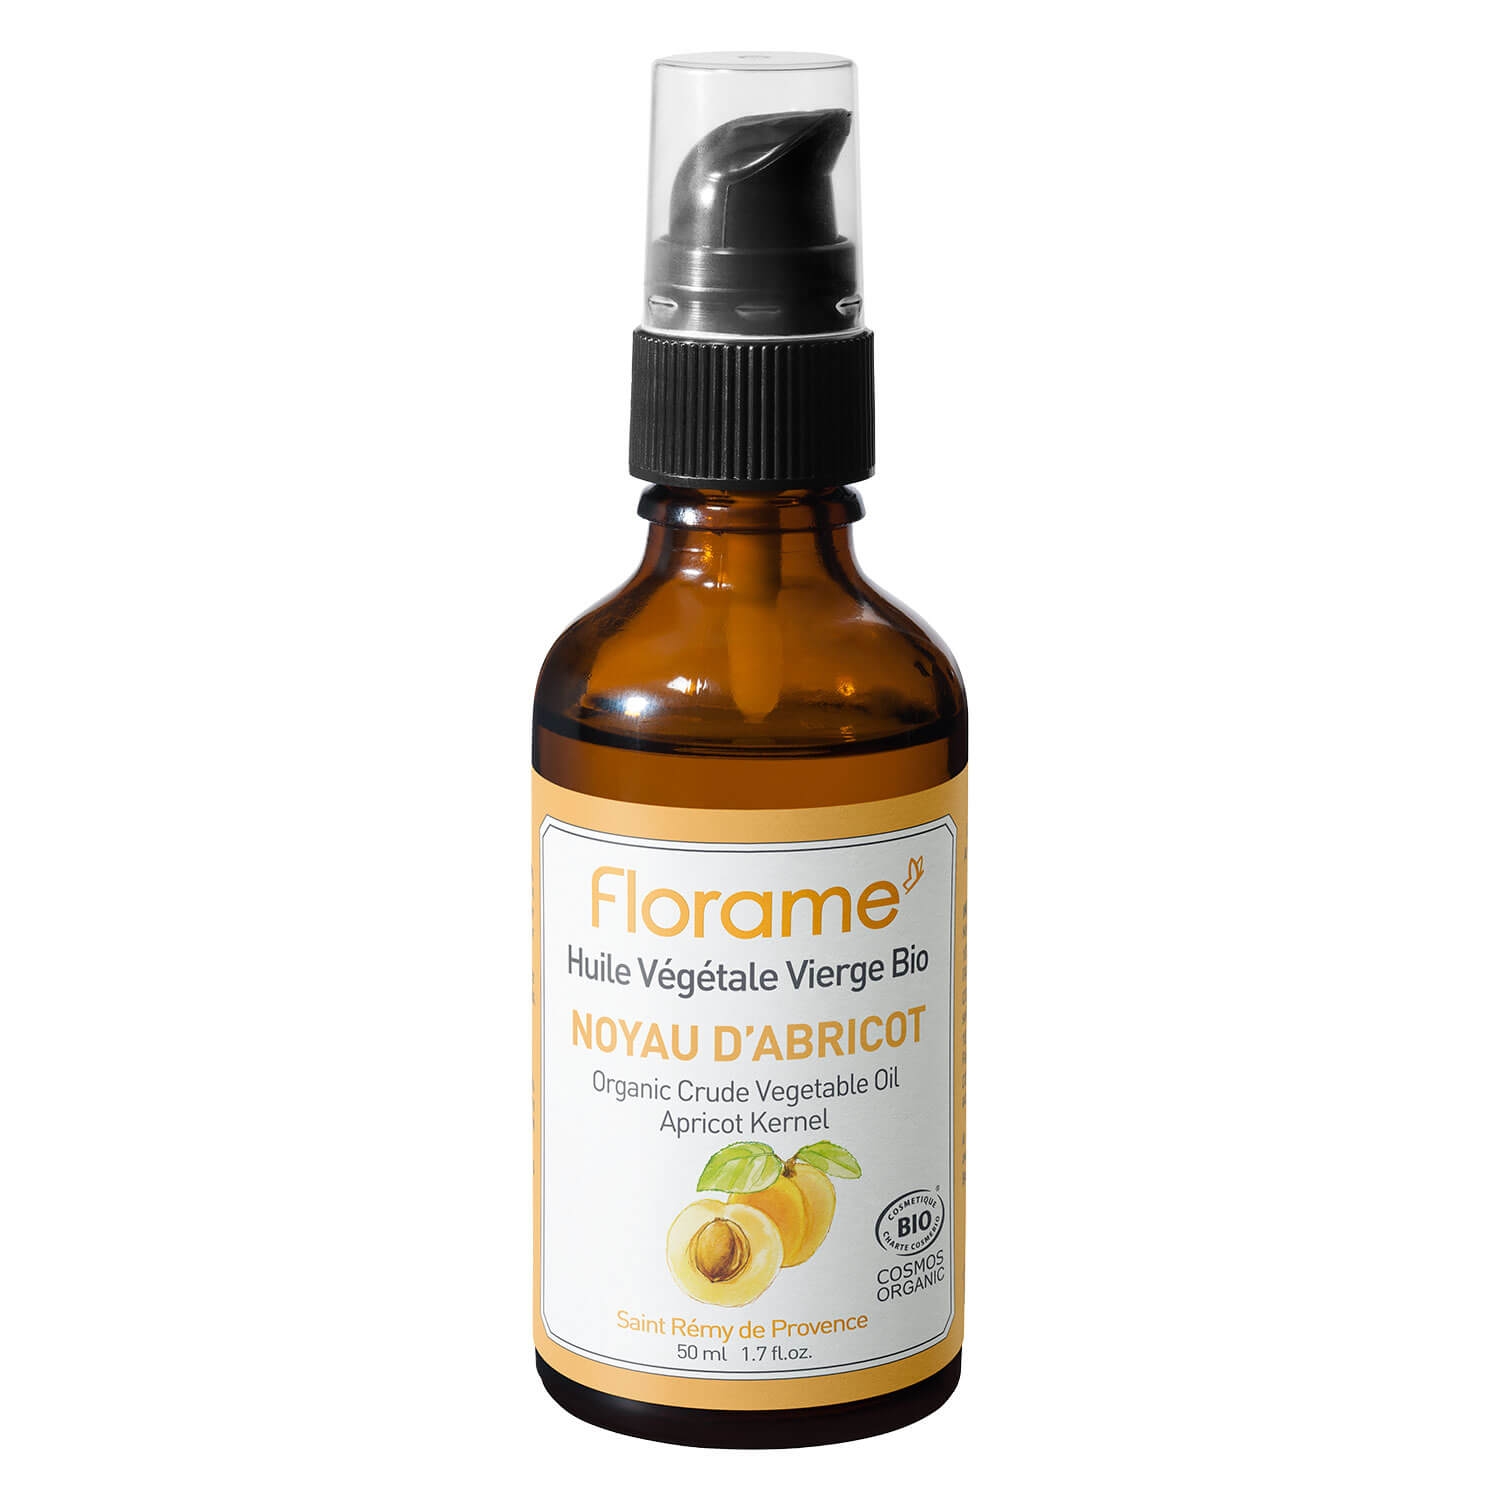 Product image from Florame - Organic Apricol Kernels Vegetable Oil